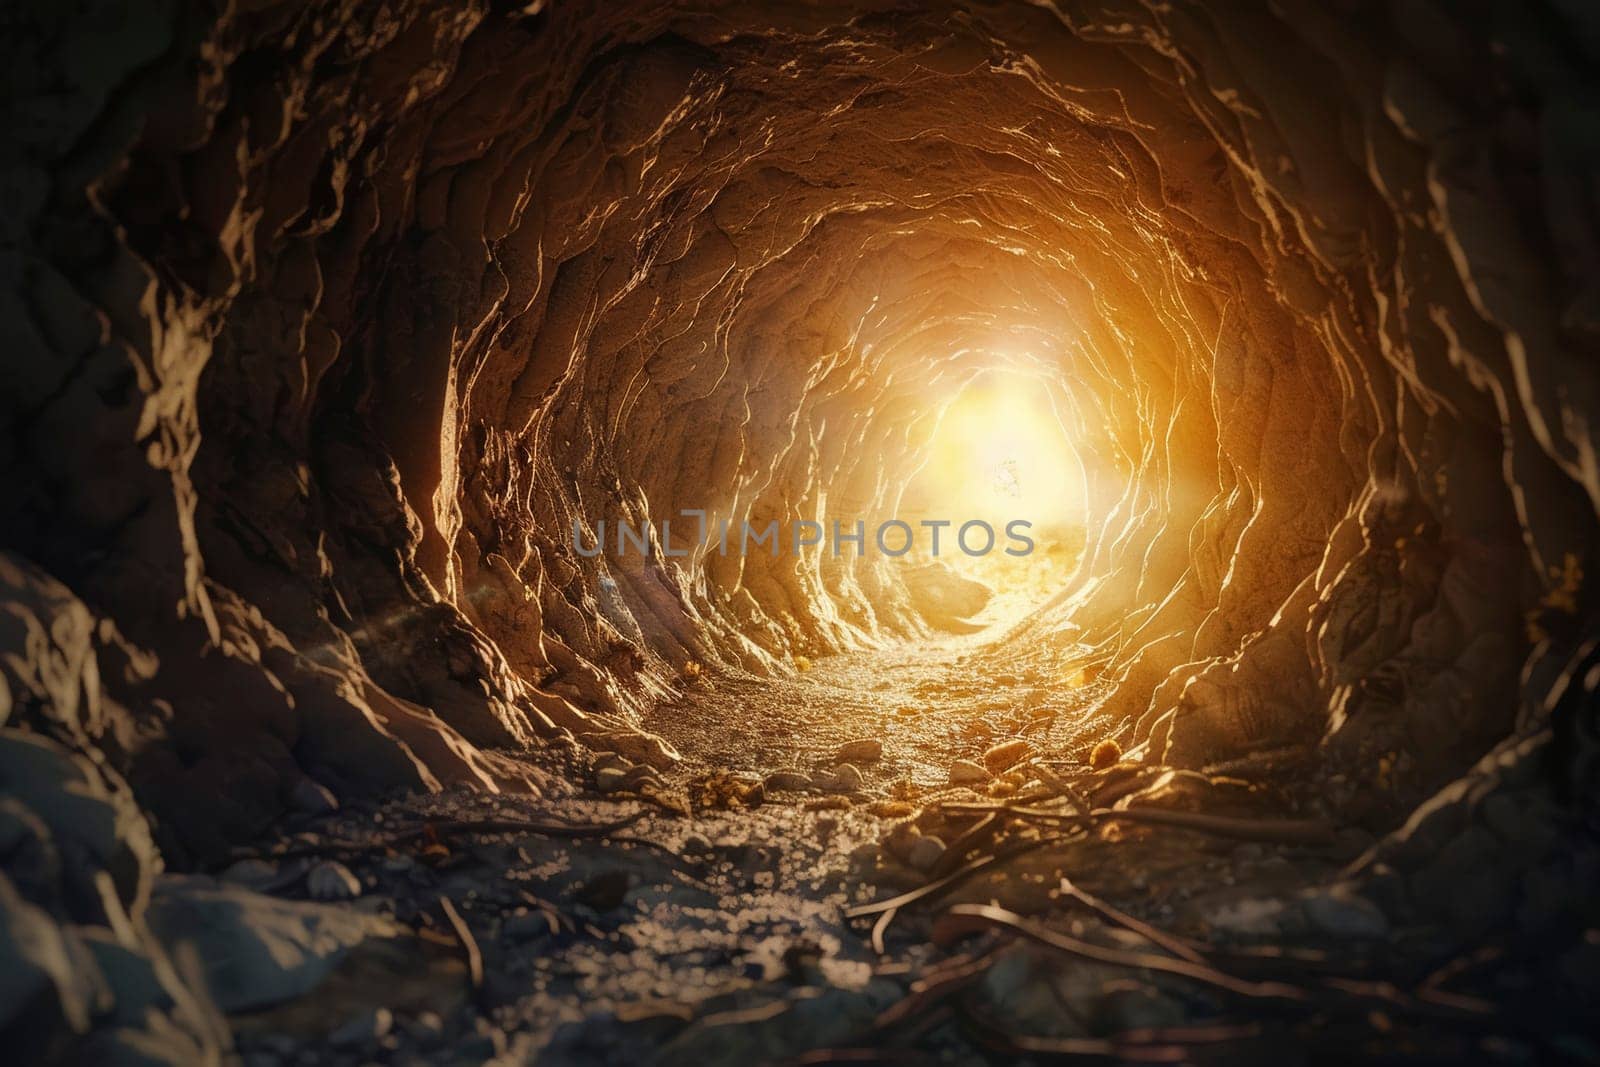 A metaphorical representation of hope, with sunlight streaming through the end of a rugged tunnel. The journey through darkness leading to a bright exit symbolizes optimism